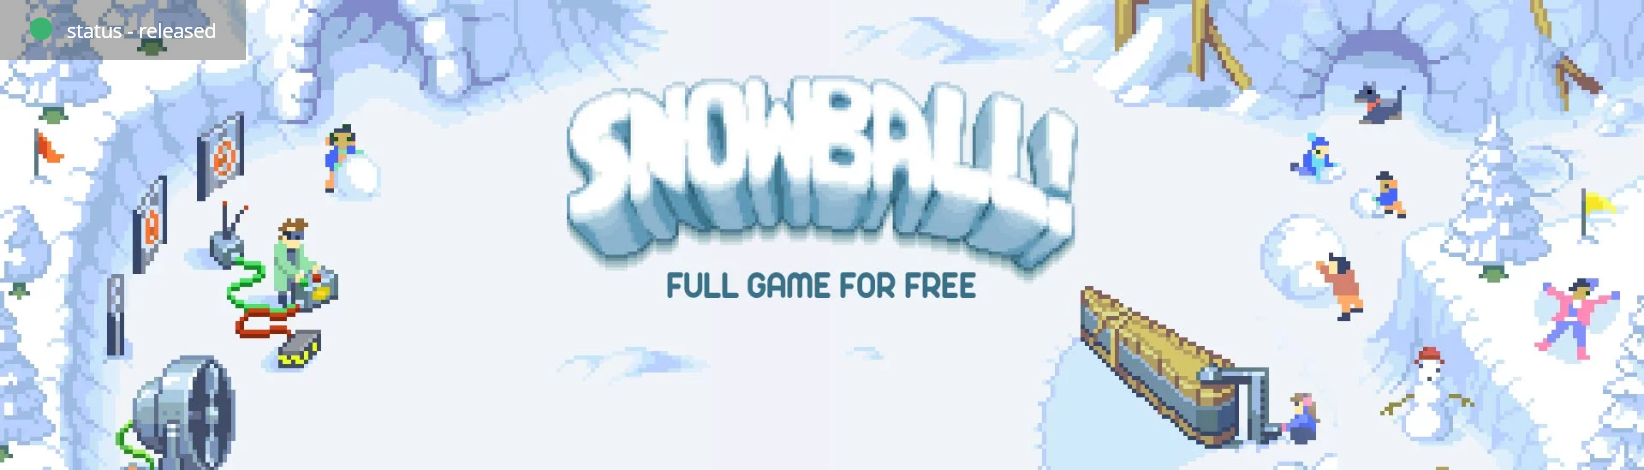 Screenshot_2019-06-12 Snowball Indiegala Developers.png